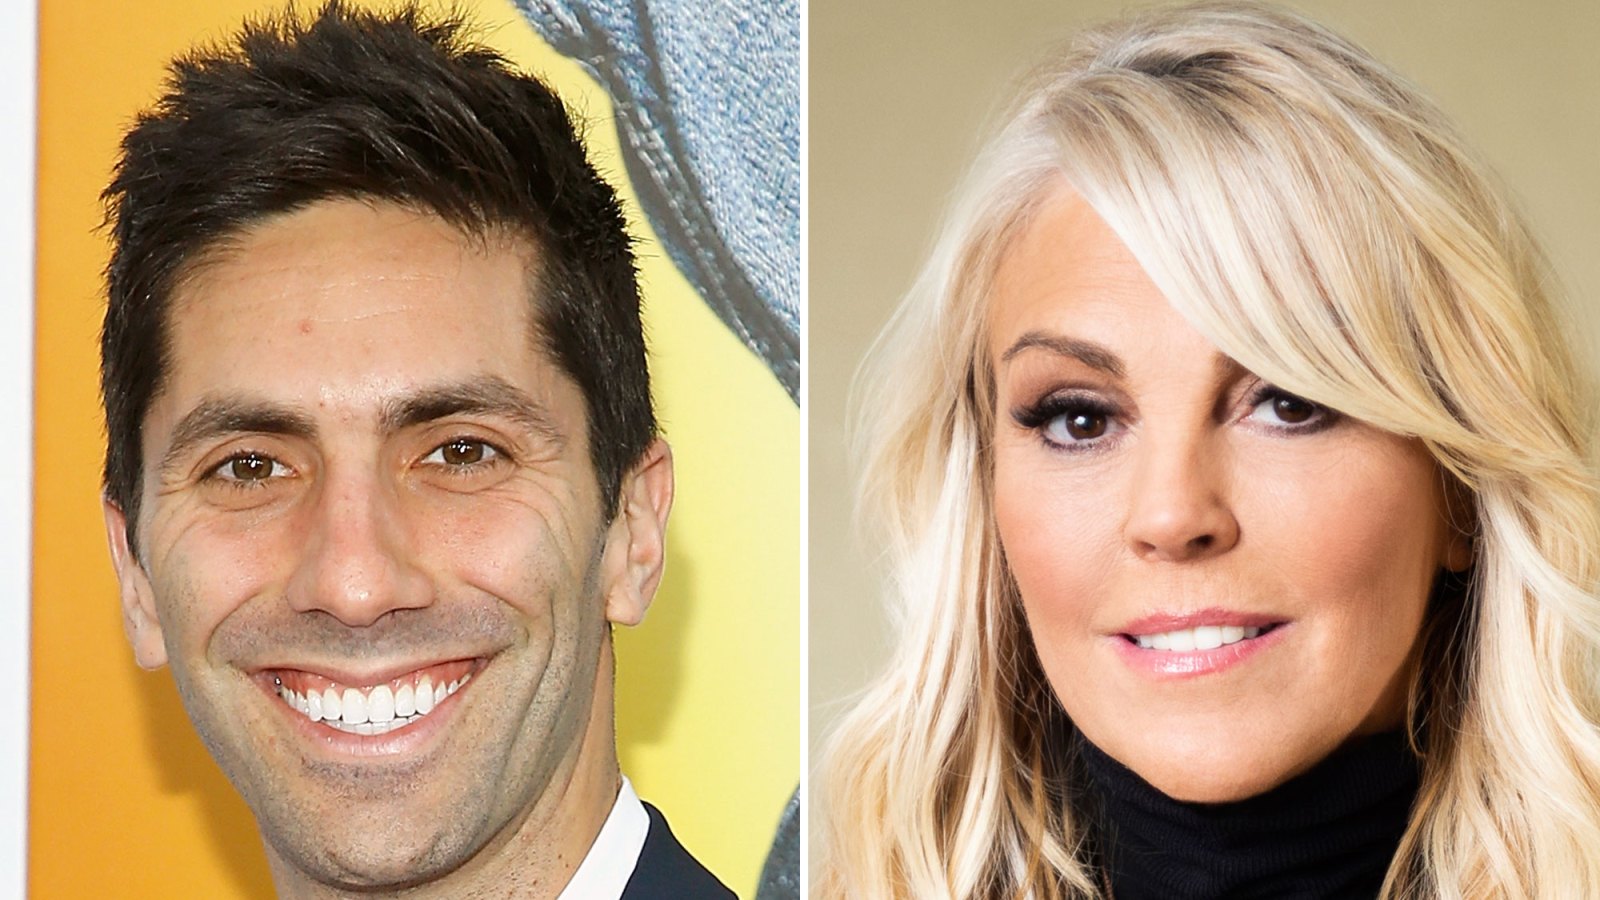 Nev Schulman Offers to Help Dina Lohan With BF She's Never Met